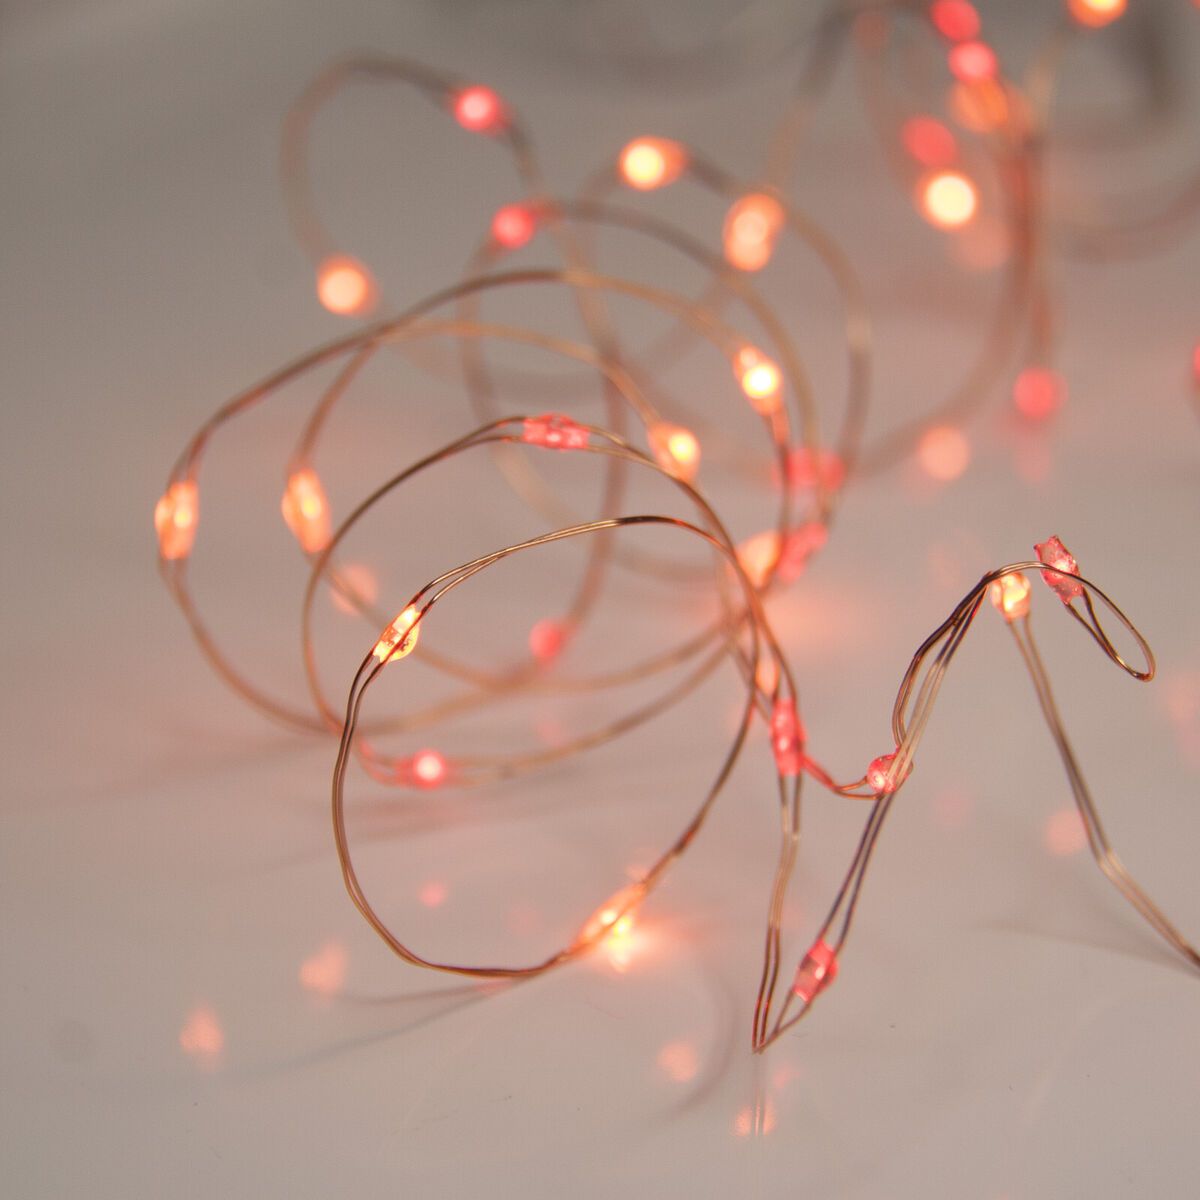 Qbis Battery Fairy Lights with Timer On Thin Wire. Micro String Lights